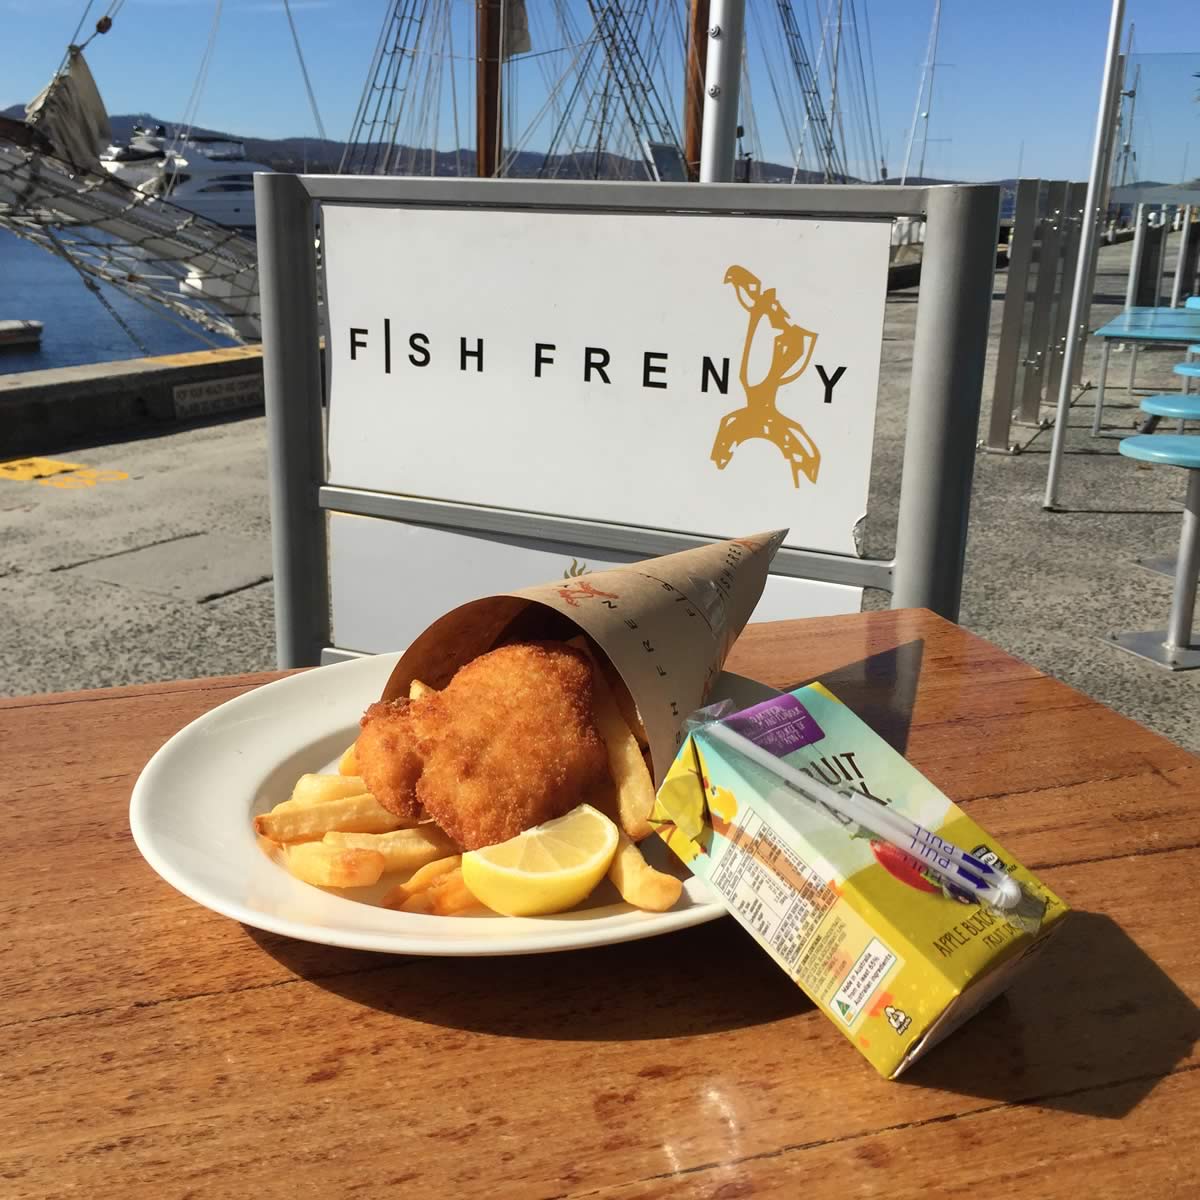 School holiday special September/October 2020 – Shark Attack kid’s fish and chips with a Fruit Box for $7.50